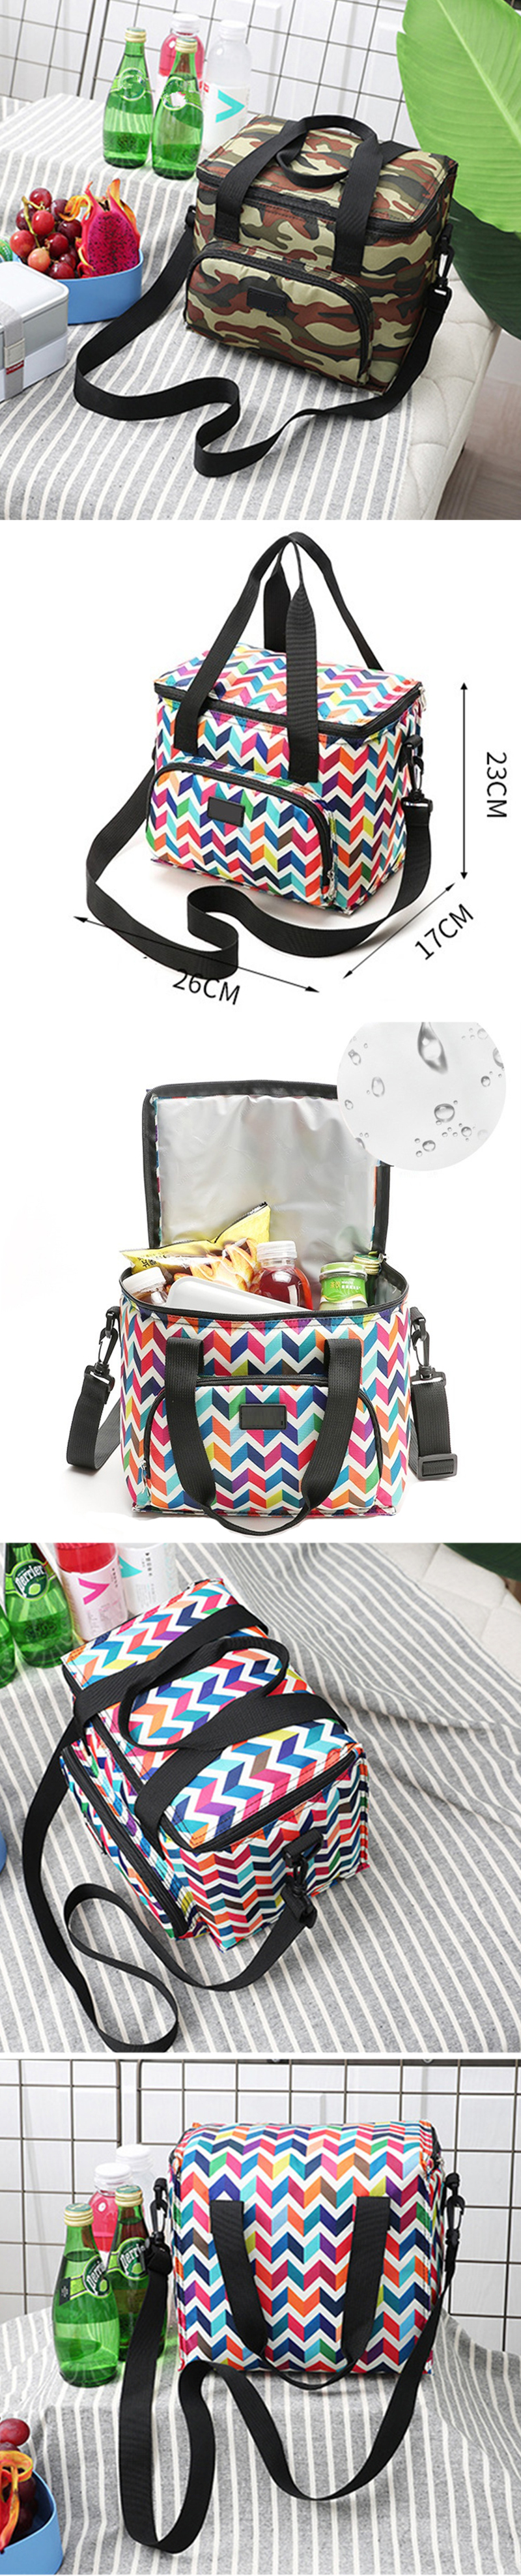 10L-Picnic-Bag-Thermal-Insulated-Thermal-Cooler-Insulated-Tote-Lunch-Food-Container-BBQ-Storage-Box-1368030-1